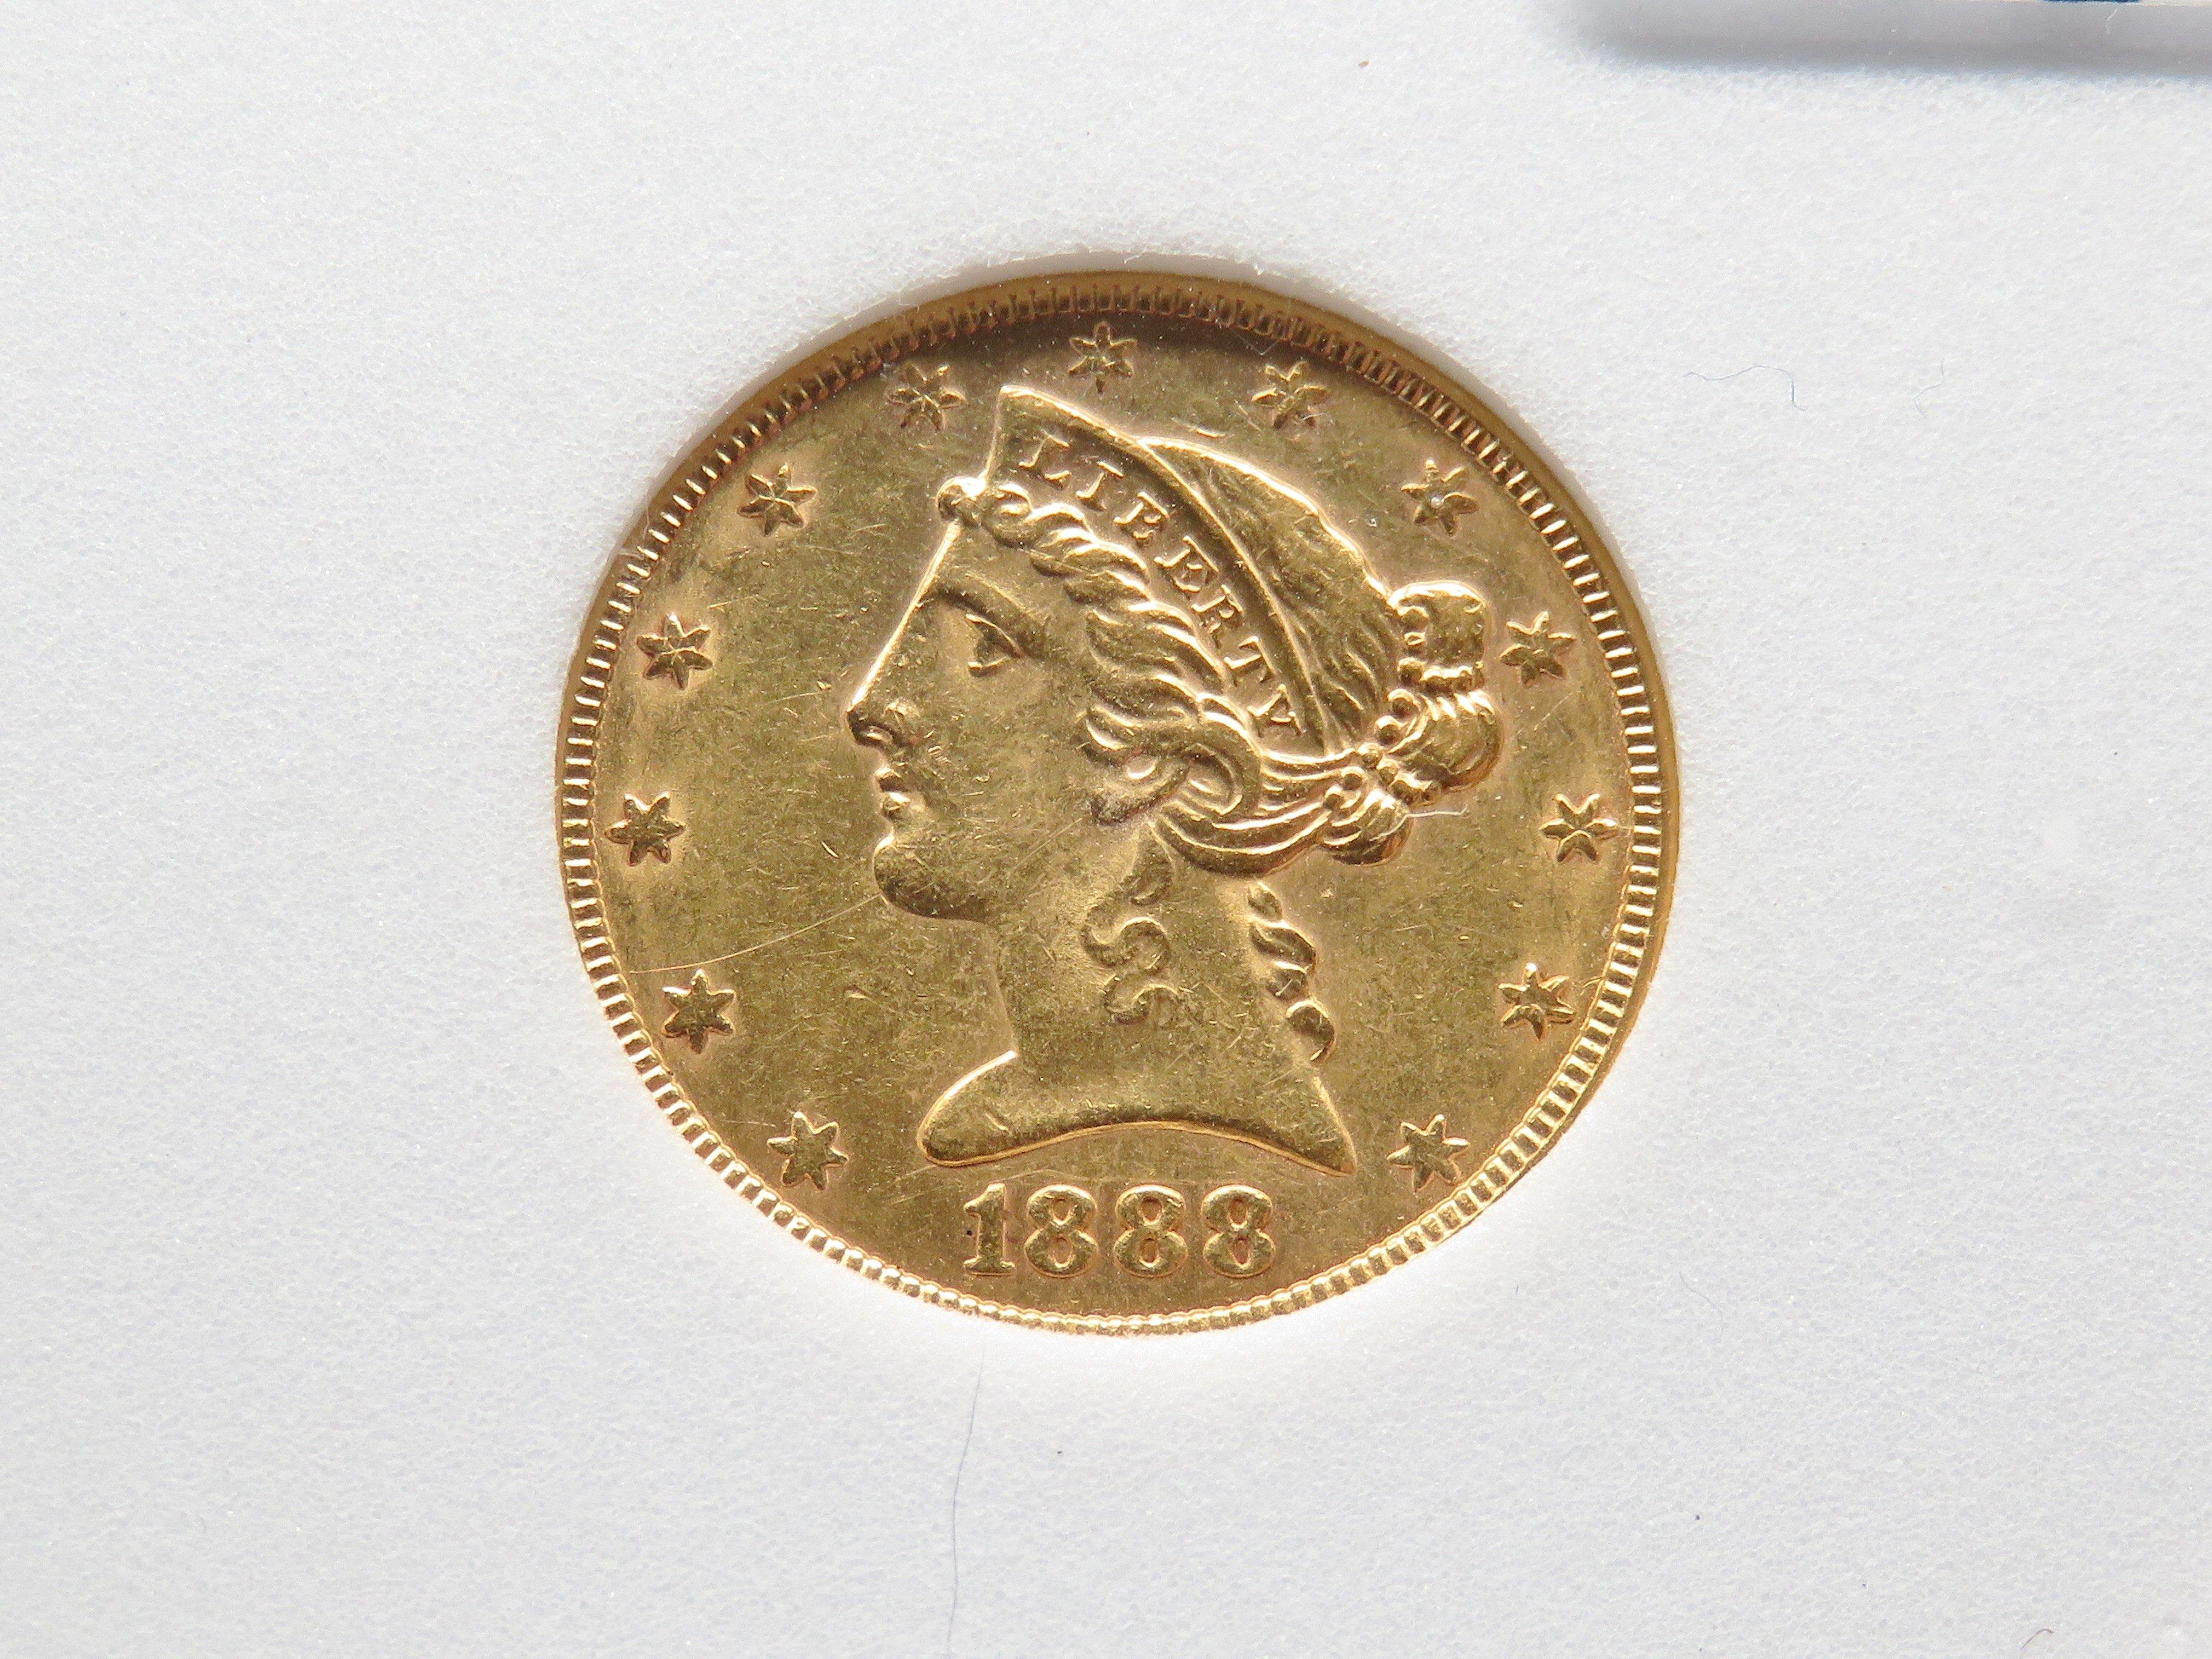 $5 Liberty Head Gold Half Eagle 1888-S  NNC Mint State (Only 293,900 minted)